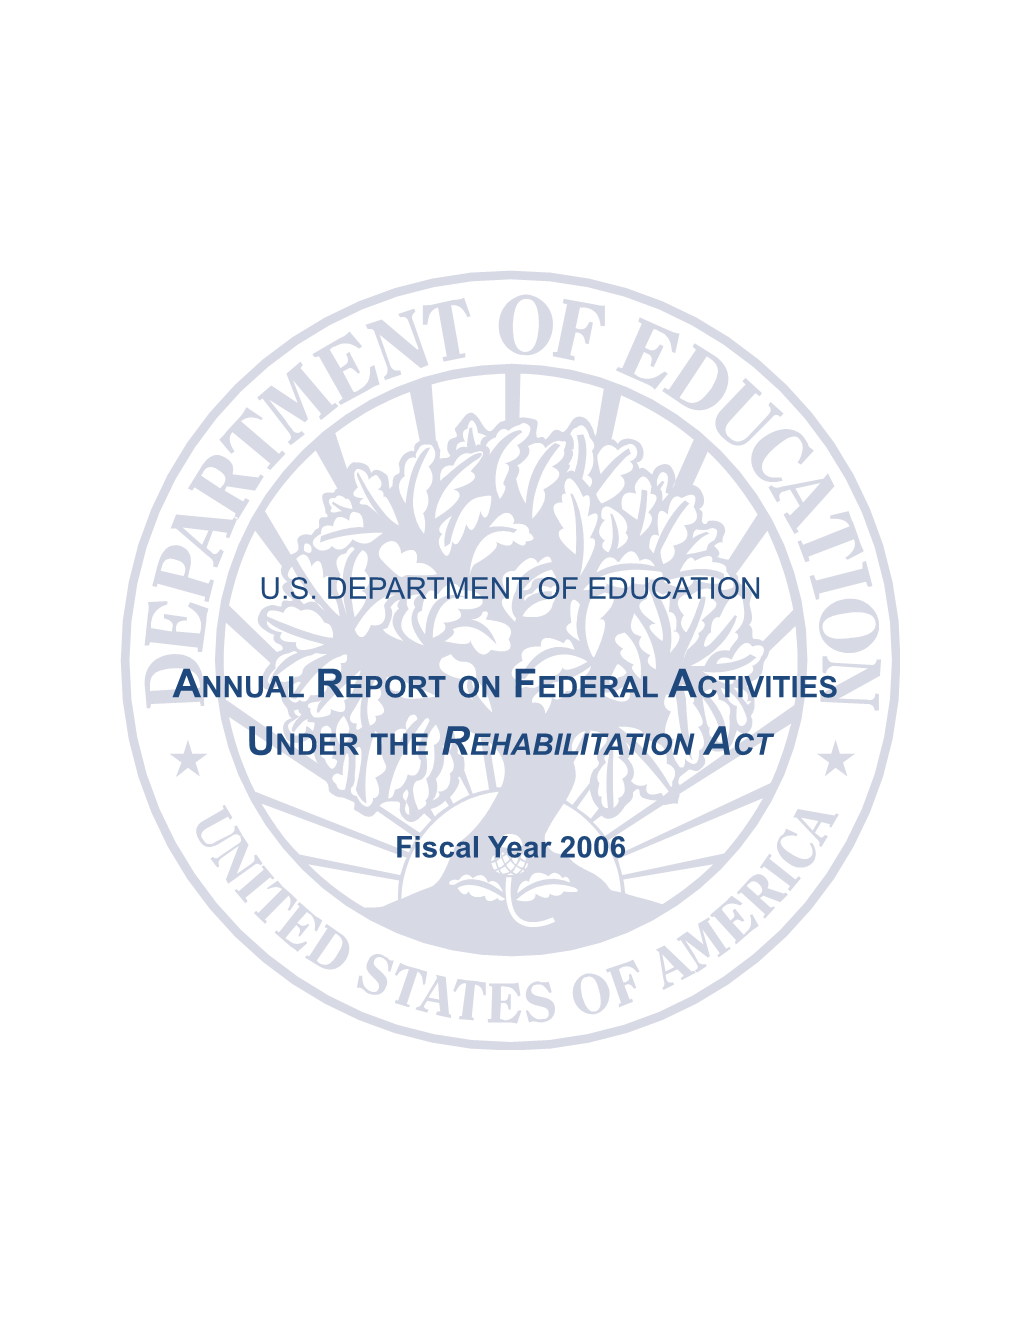 Annual Report on Federal Activities Under the Rehabilitation Act, Fiscal Year 2006 (MS Word)